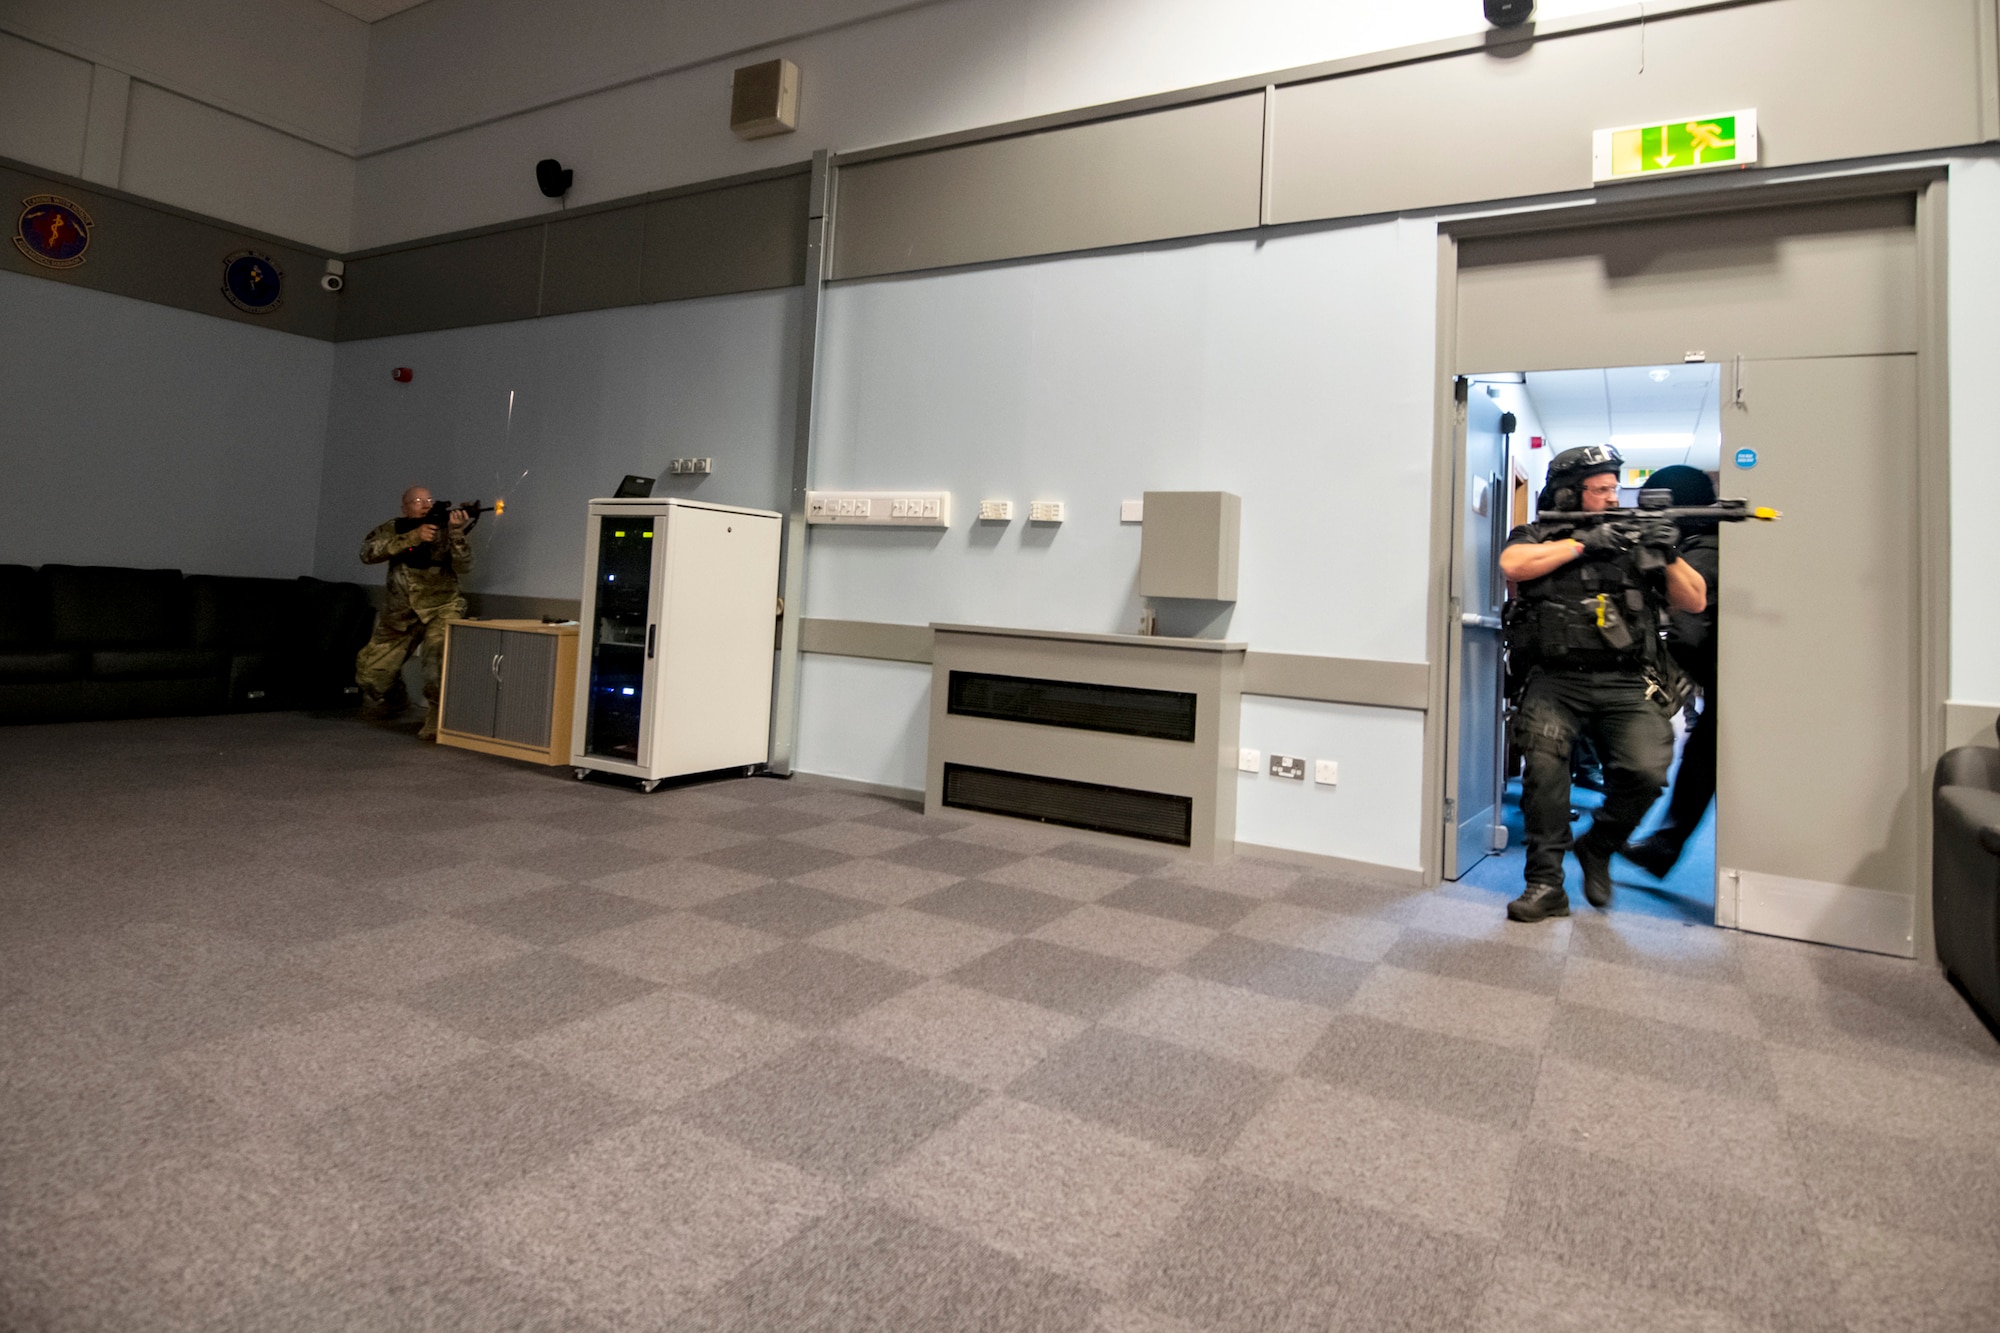 A simulated active shooter, left, engages with police officers from the Northamptonshire police department, during a tri-agency active shooter response exercise at RAF Croughton, England, June 30, 2021. Airmen from the 422nd Security Forces Squadron along with police officers from the NHPD and Ministry of Defense, participated in multiple exercises to enhance their search and seizure tactics, strengthen local ties and gain rapport with their fellow officers. (U.S. Air Force photo by Senior Airman Eugene Oliver)